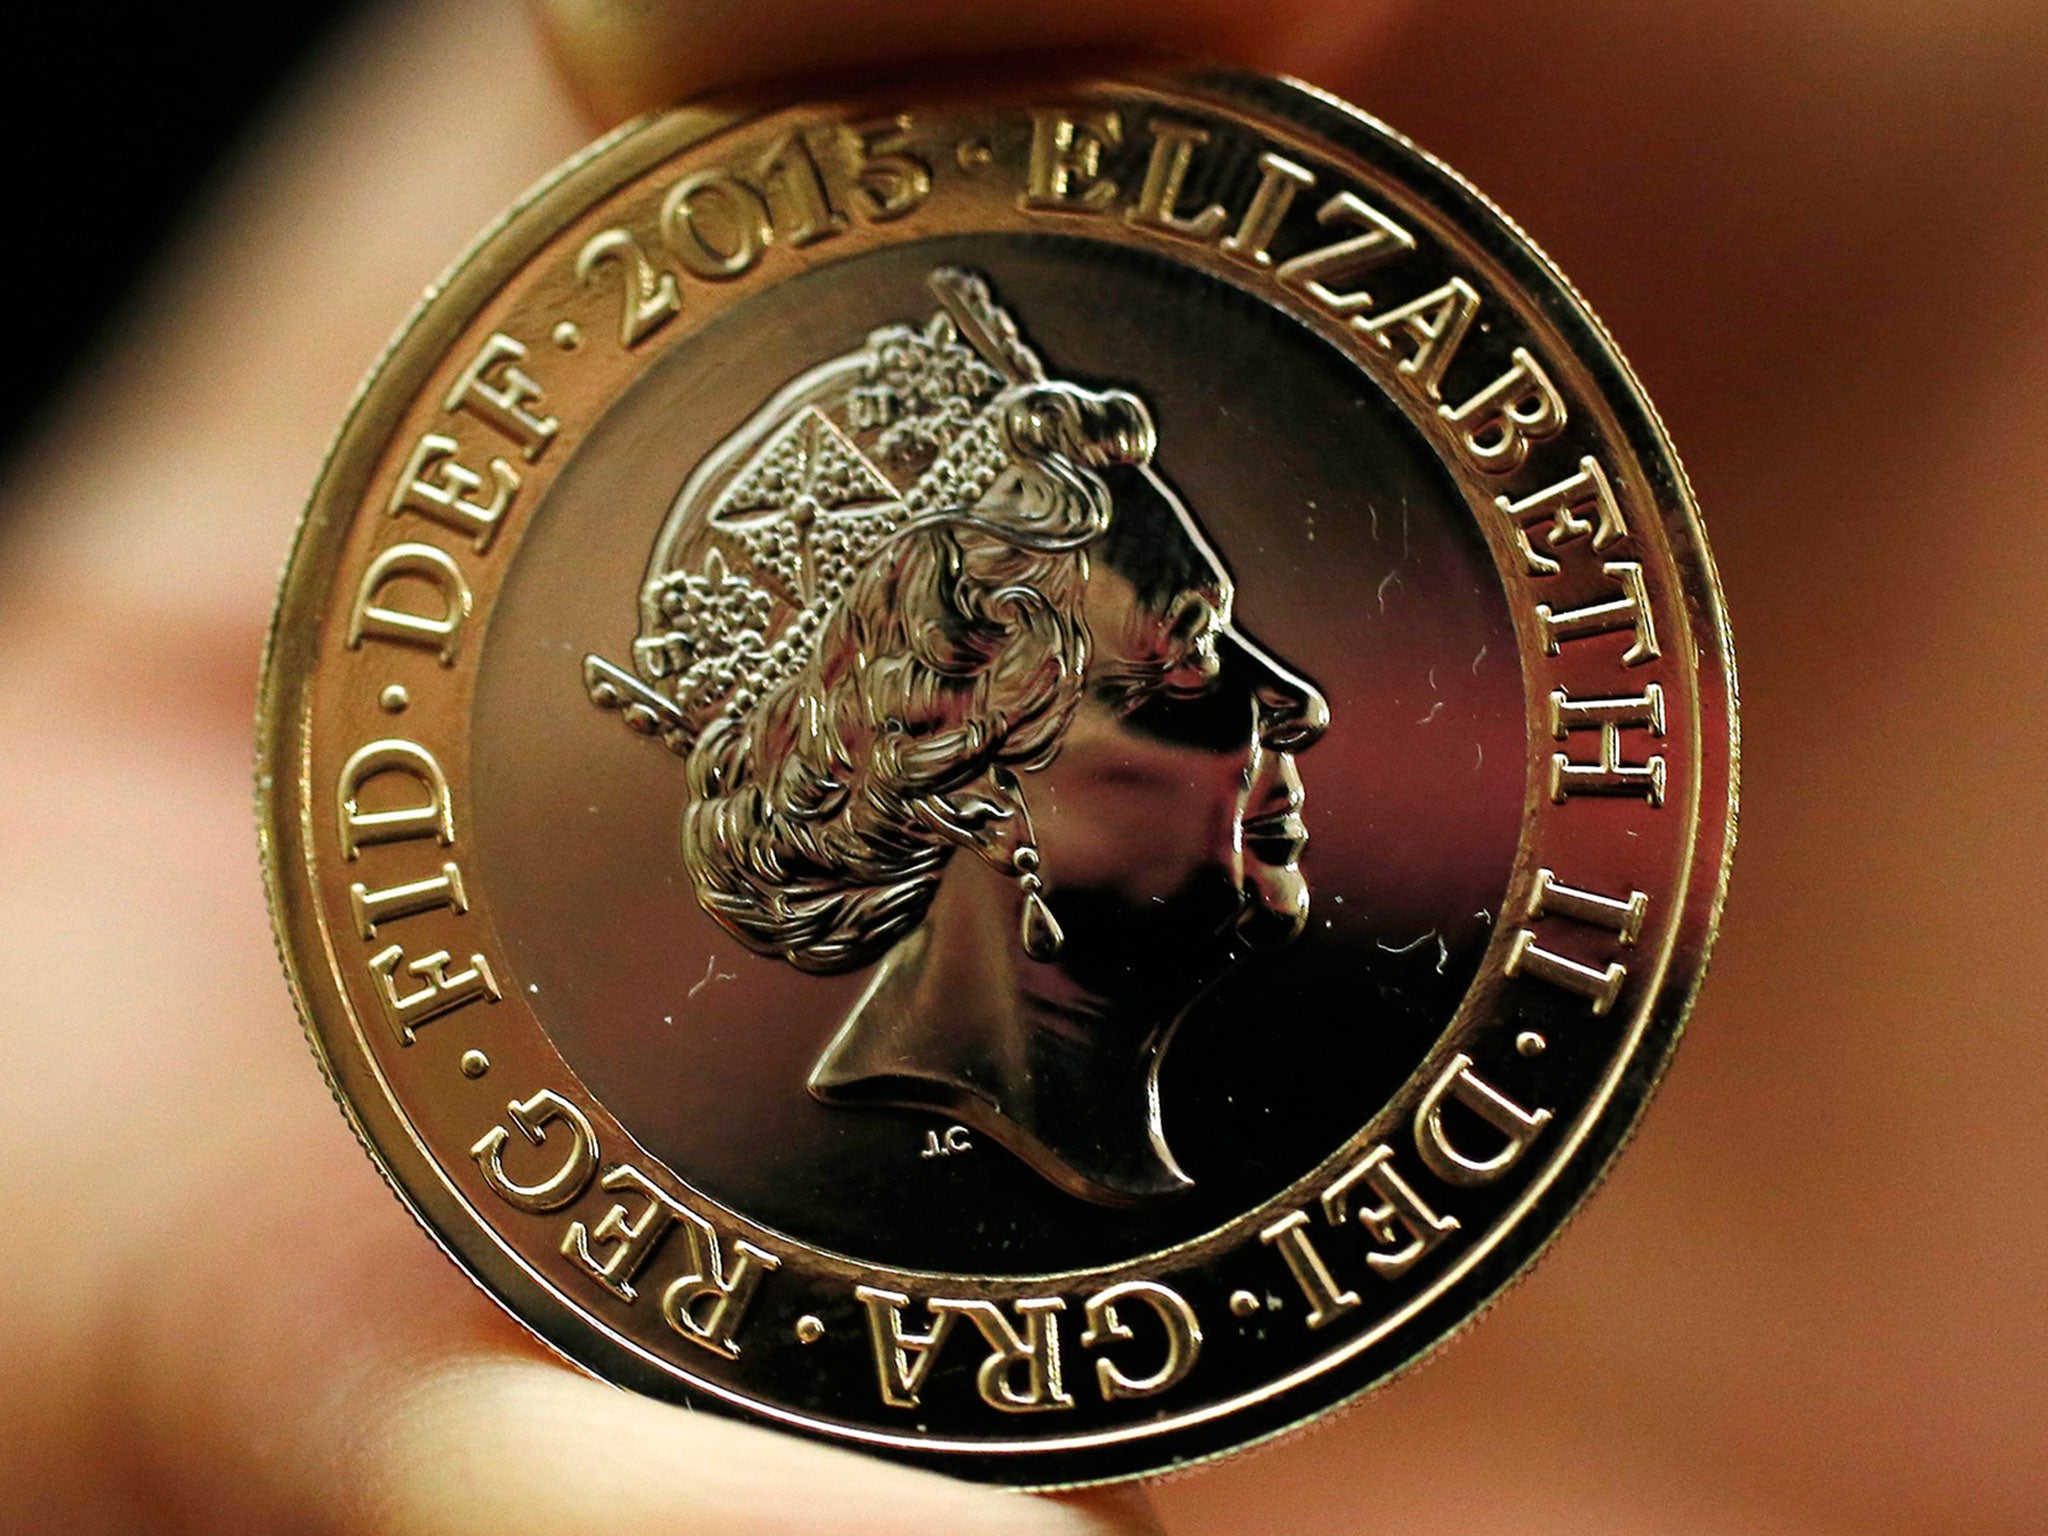 A 2-pound coin with the new portrait of Britain's Queen Elizabeth